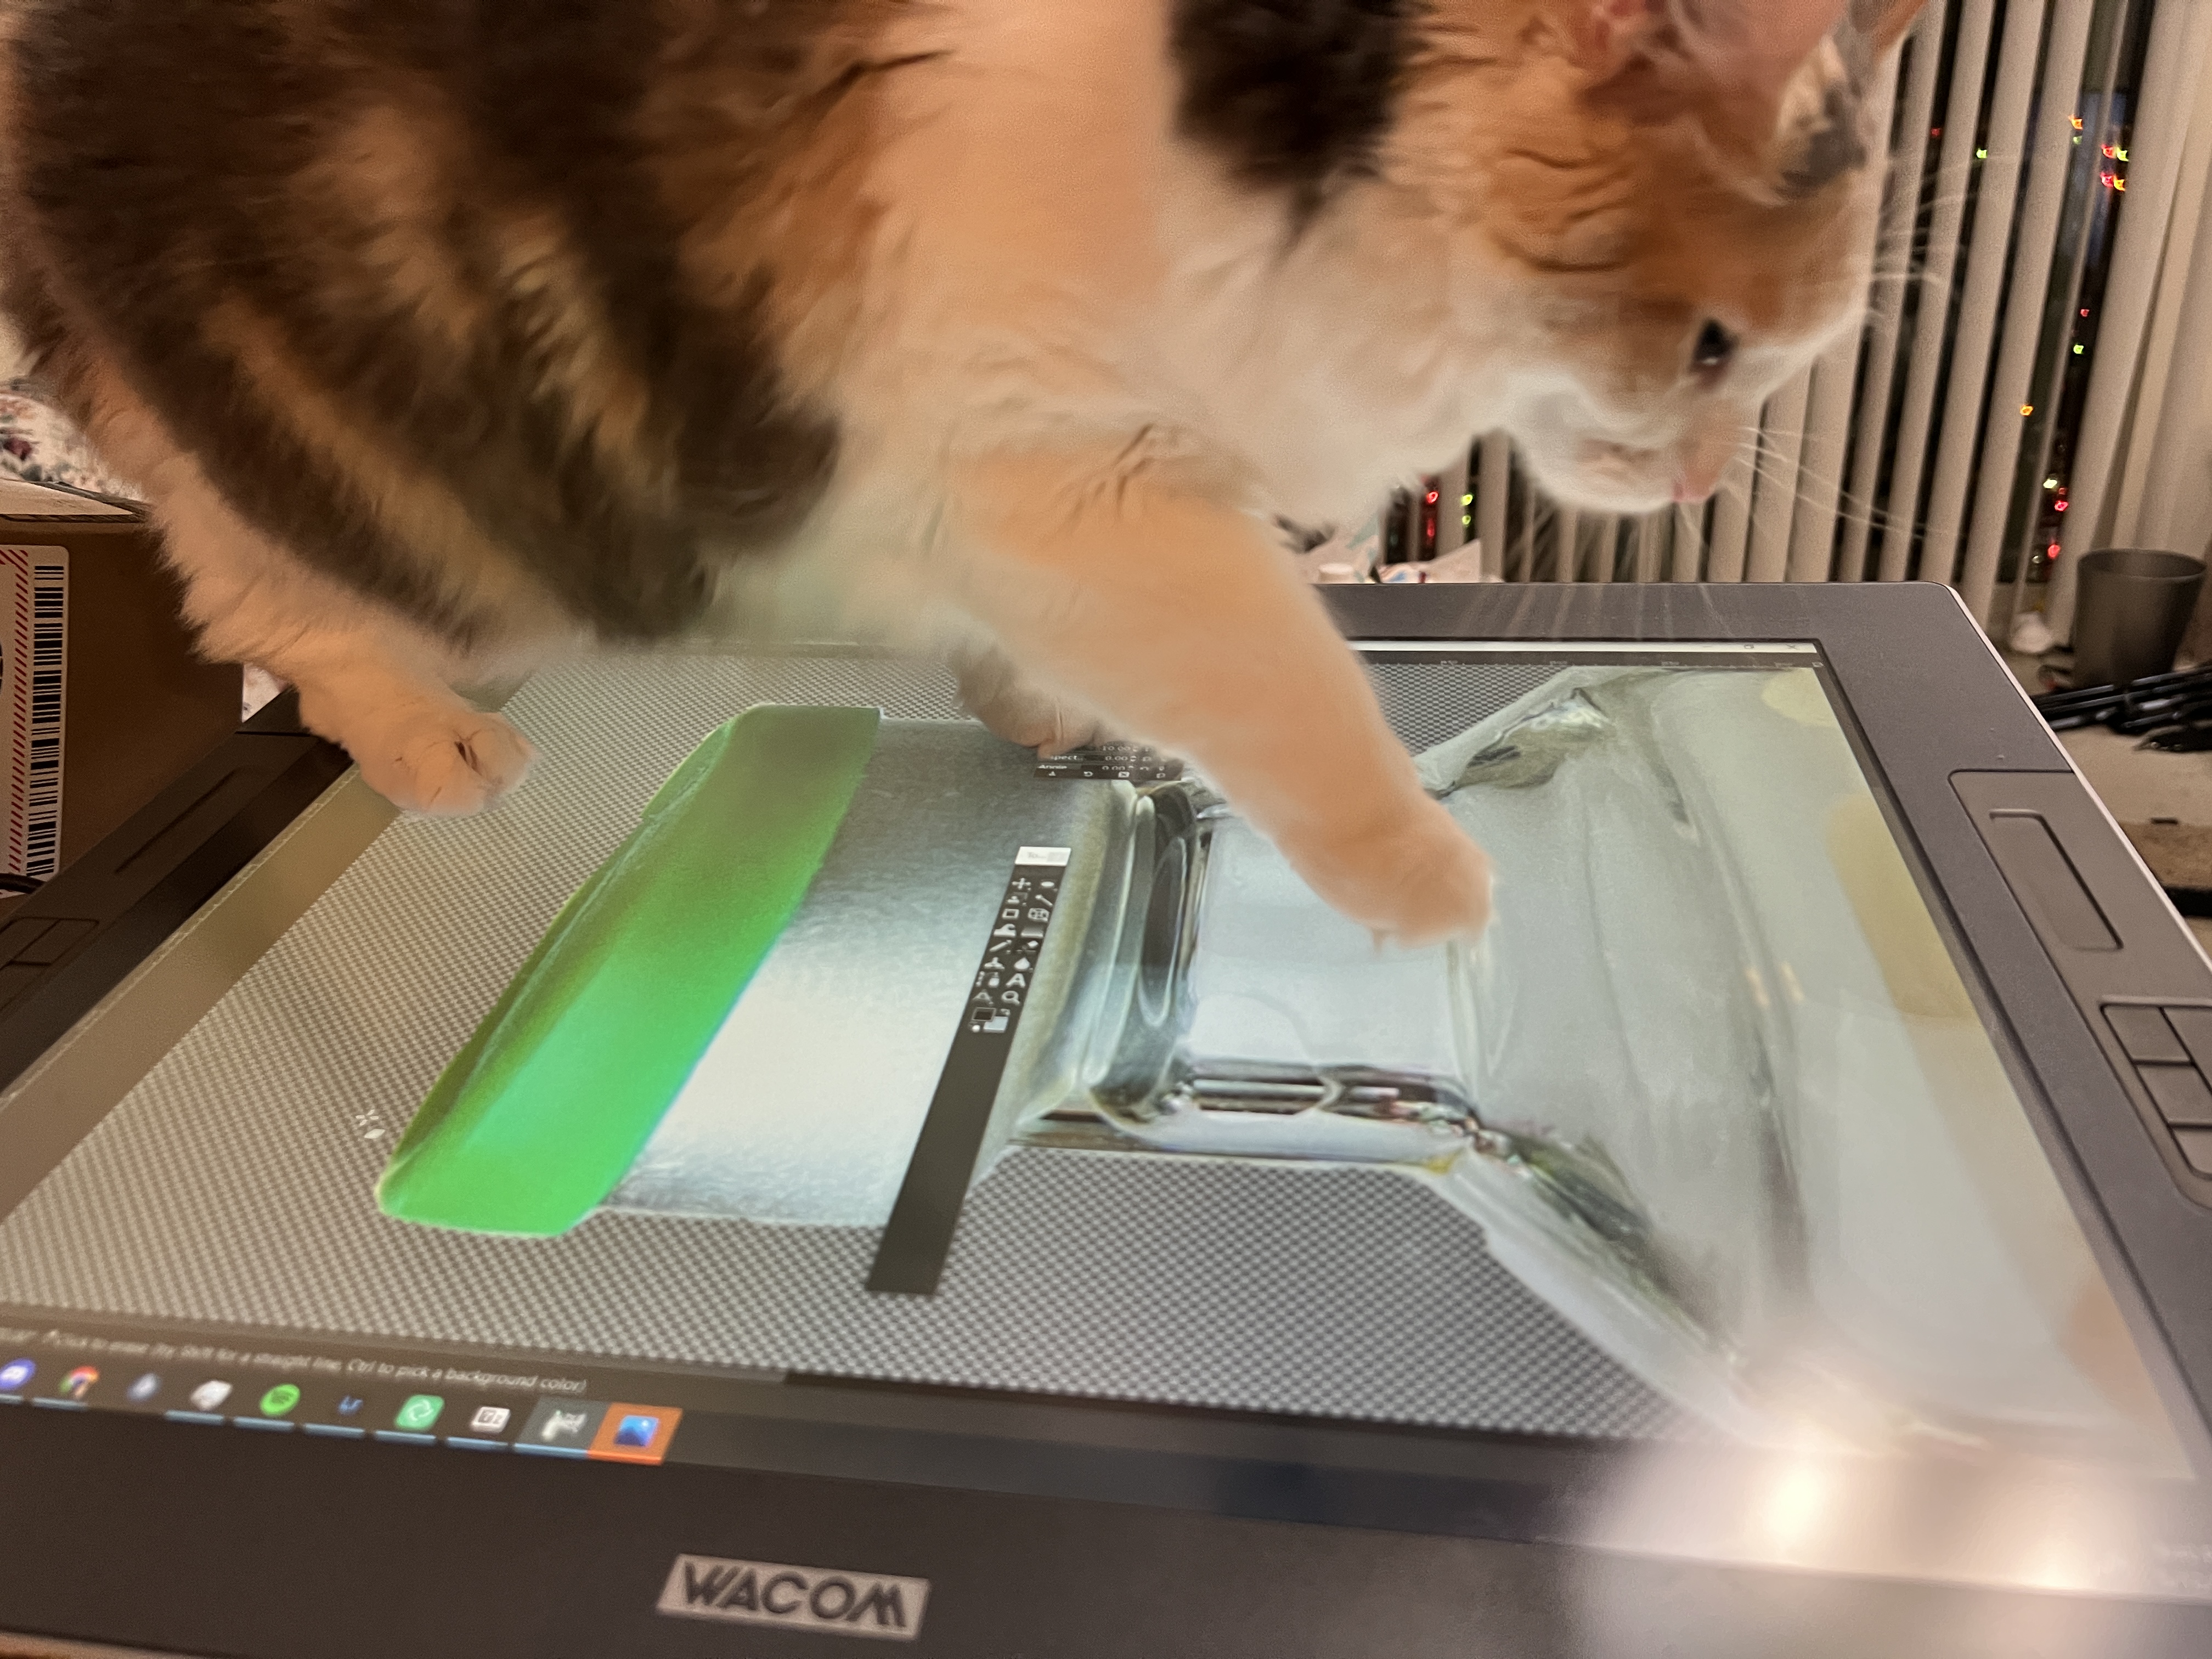 A photo of a cat walking on a Wacom graphics tablet with the top of a vial on the screen